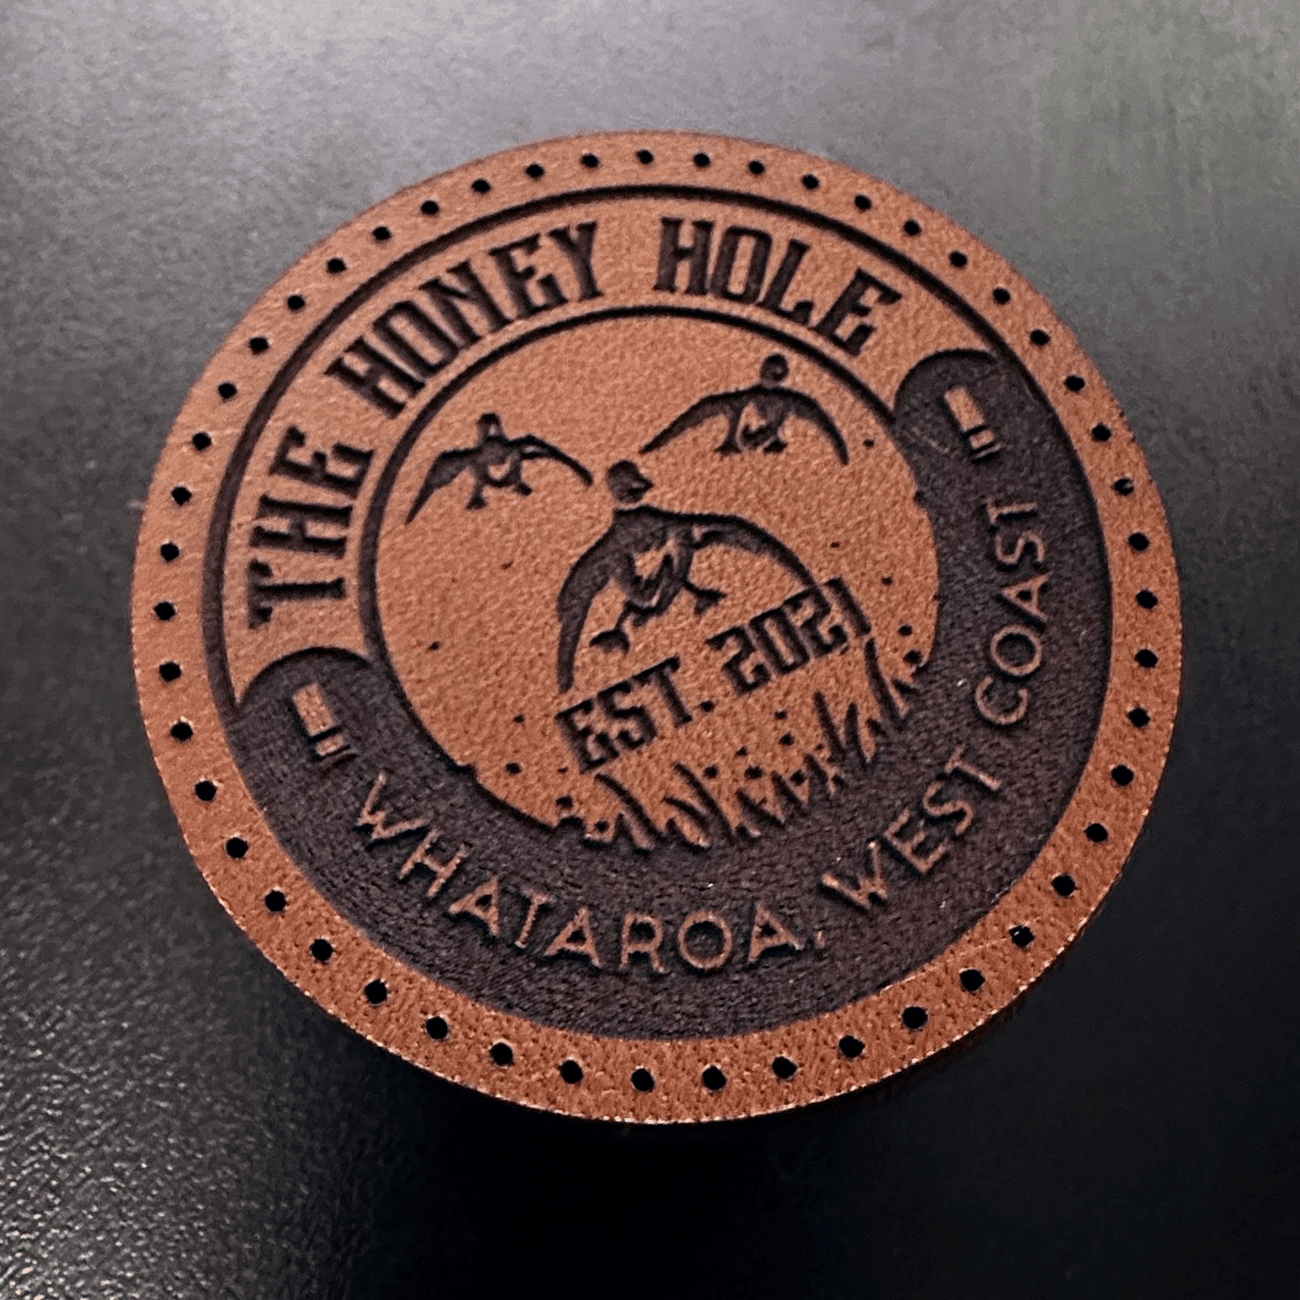 Laser-engraved leather patches